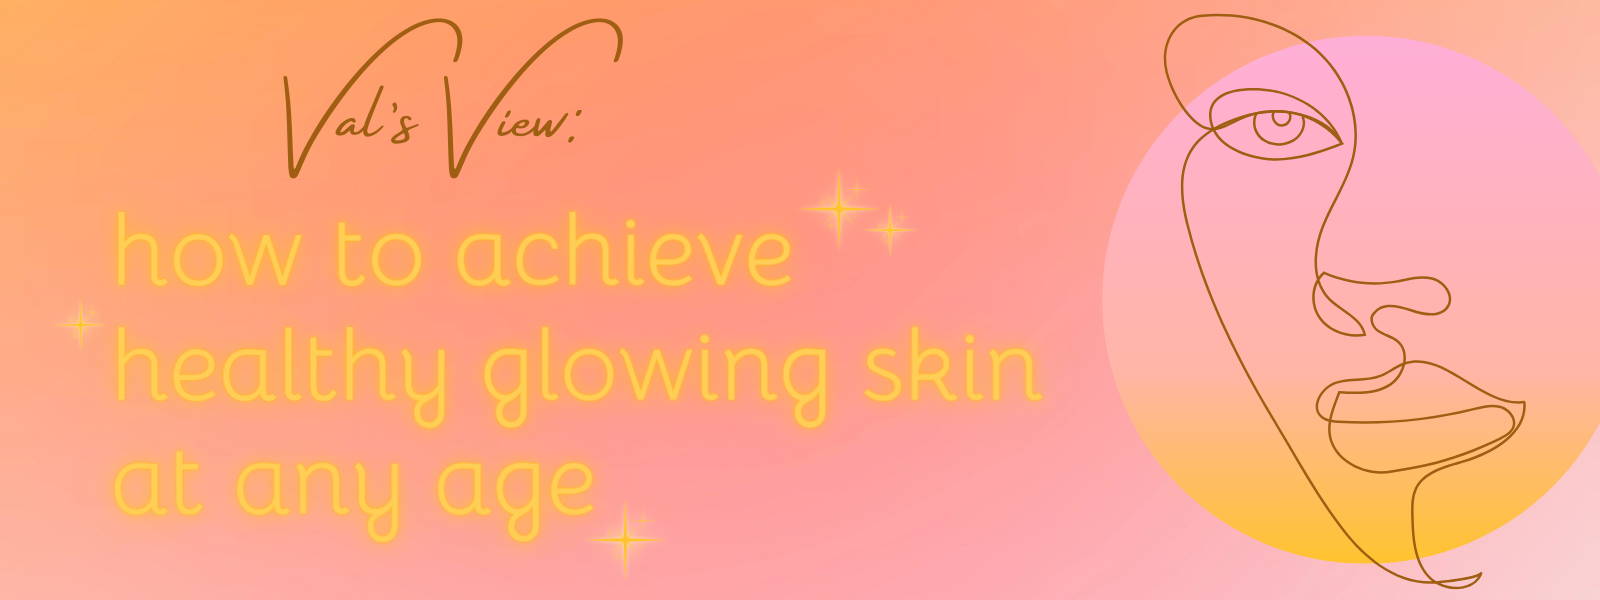 Val's View: How to Achieve Healthy Glowing Skin at Any Age